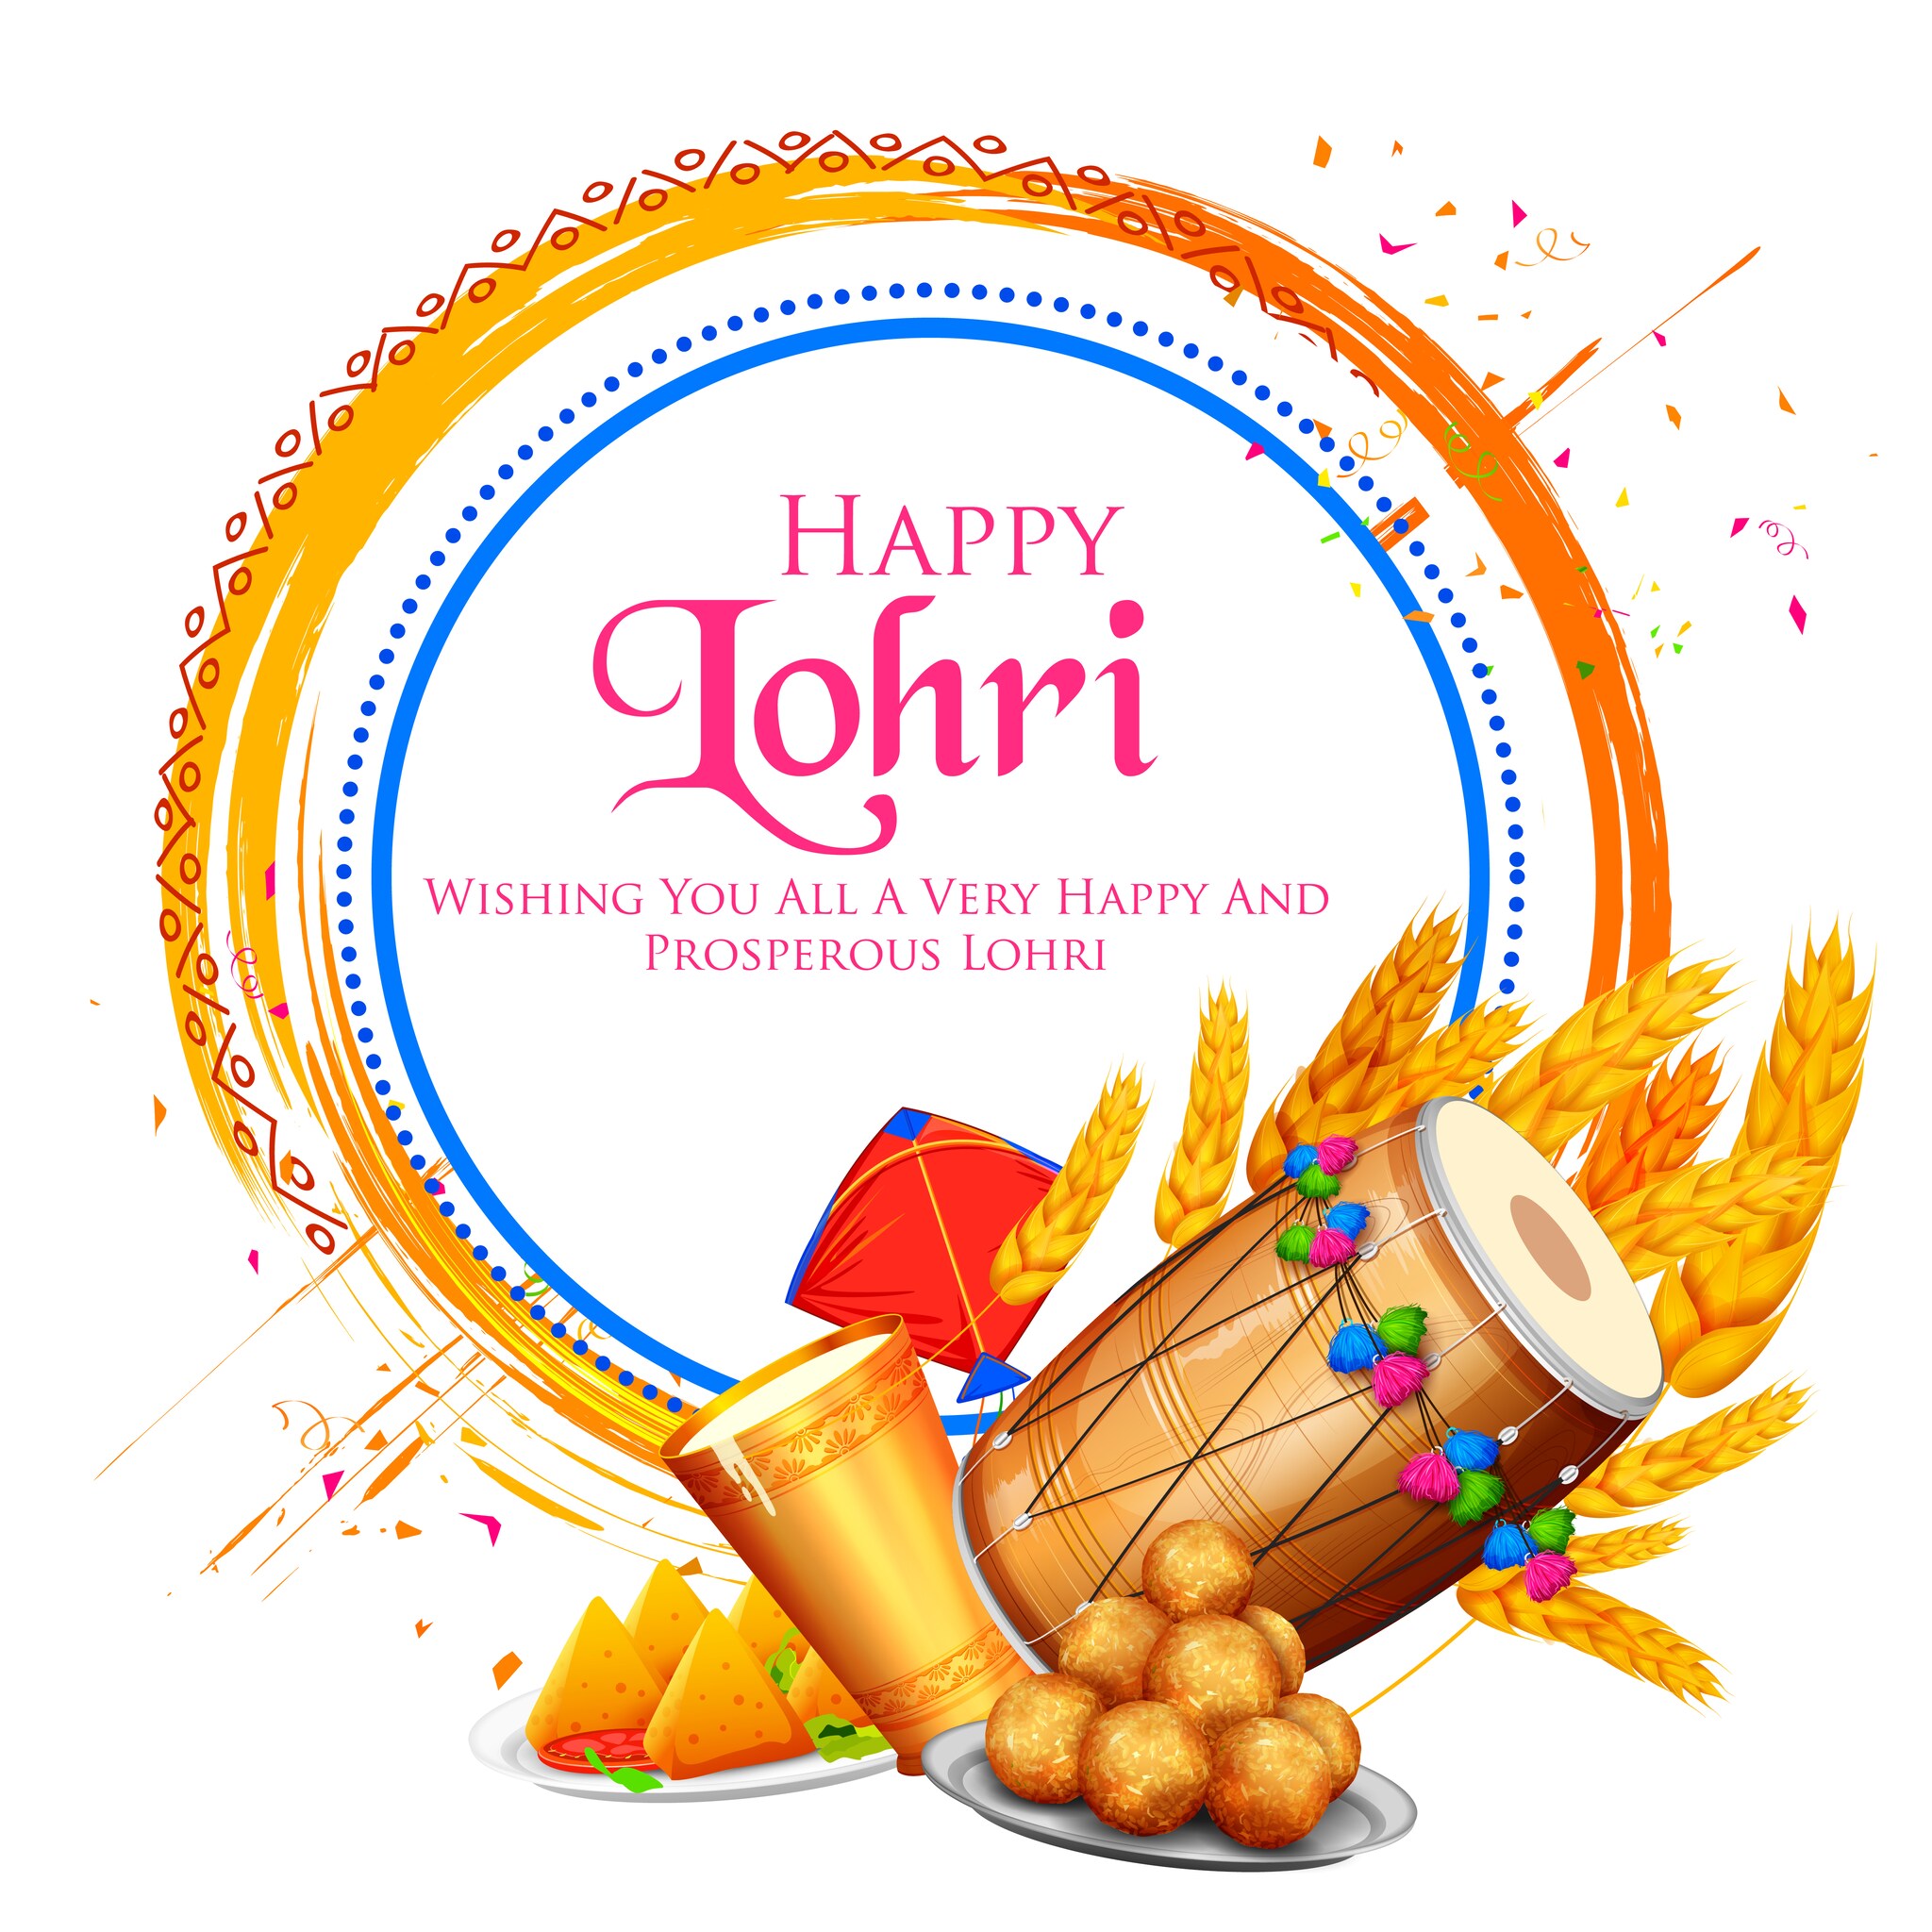 Happy Lohri 2022 Wishes, Photos, Images, Status, Quotes, Messages and